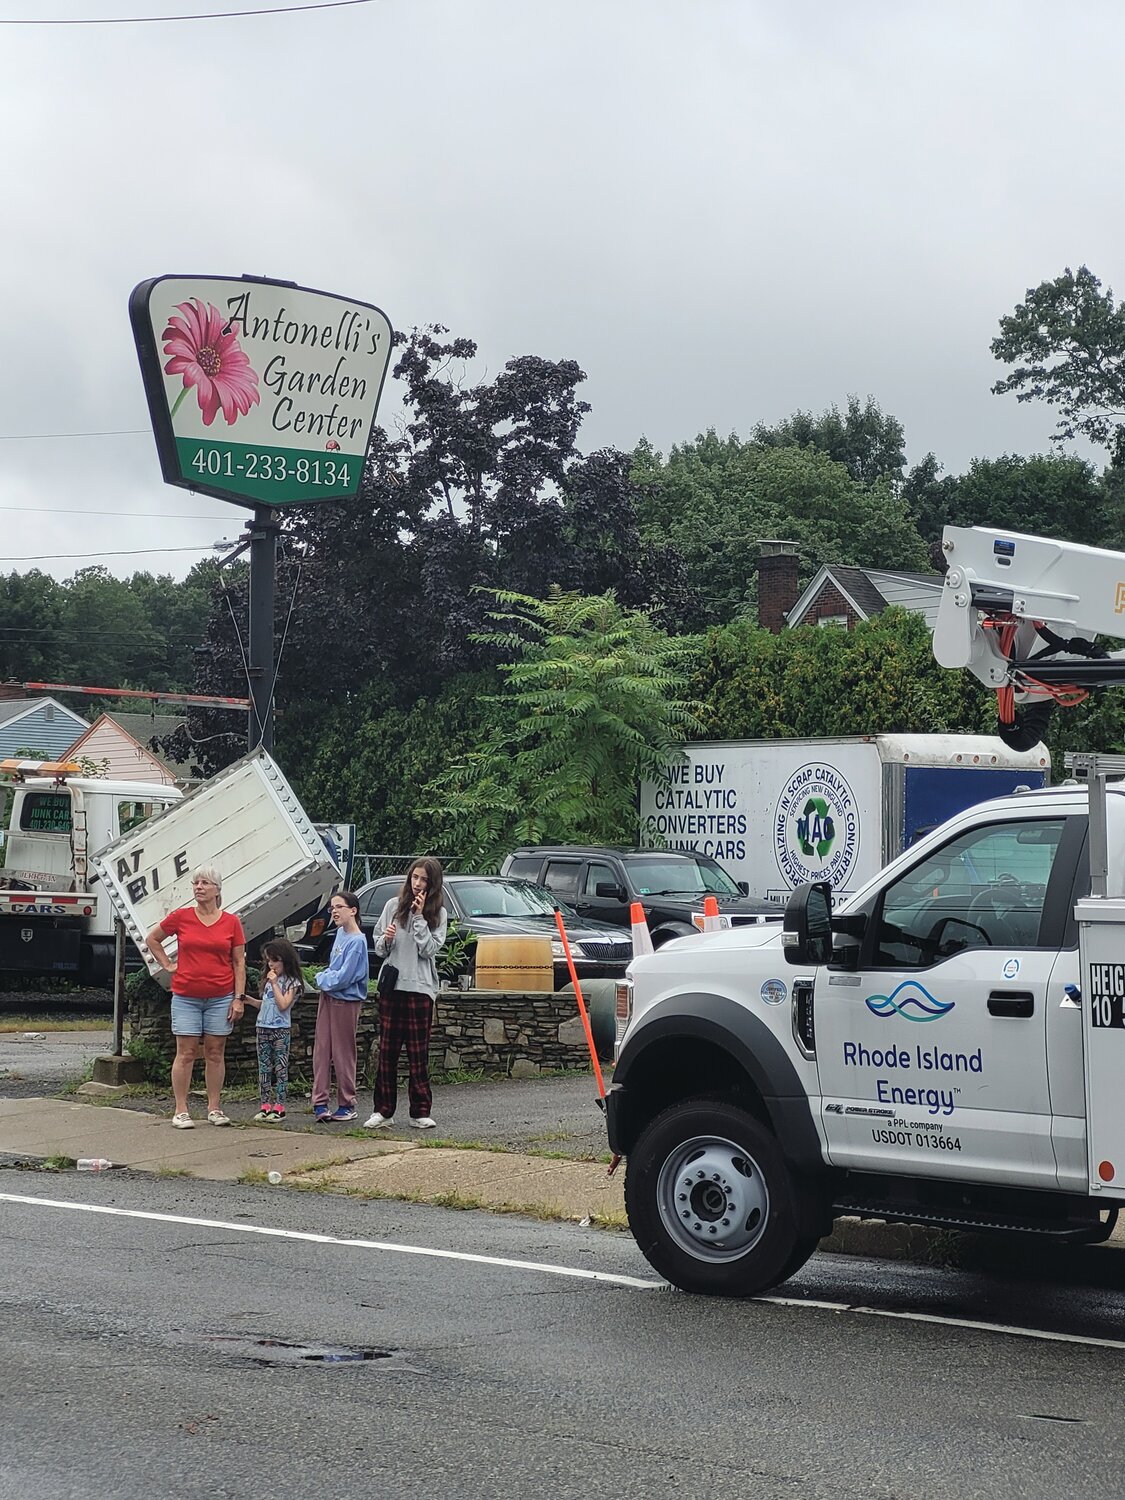 SIGNS OF DAMAGE: Residents stand along George Waterman Road looking down Amber Street at damage caused by Friday morning’s storm. A sign fell from the business behind them. Workers worked at clearing fallen trees to clear an exit for trapped Amber Street residents.